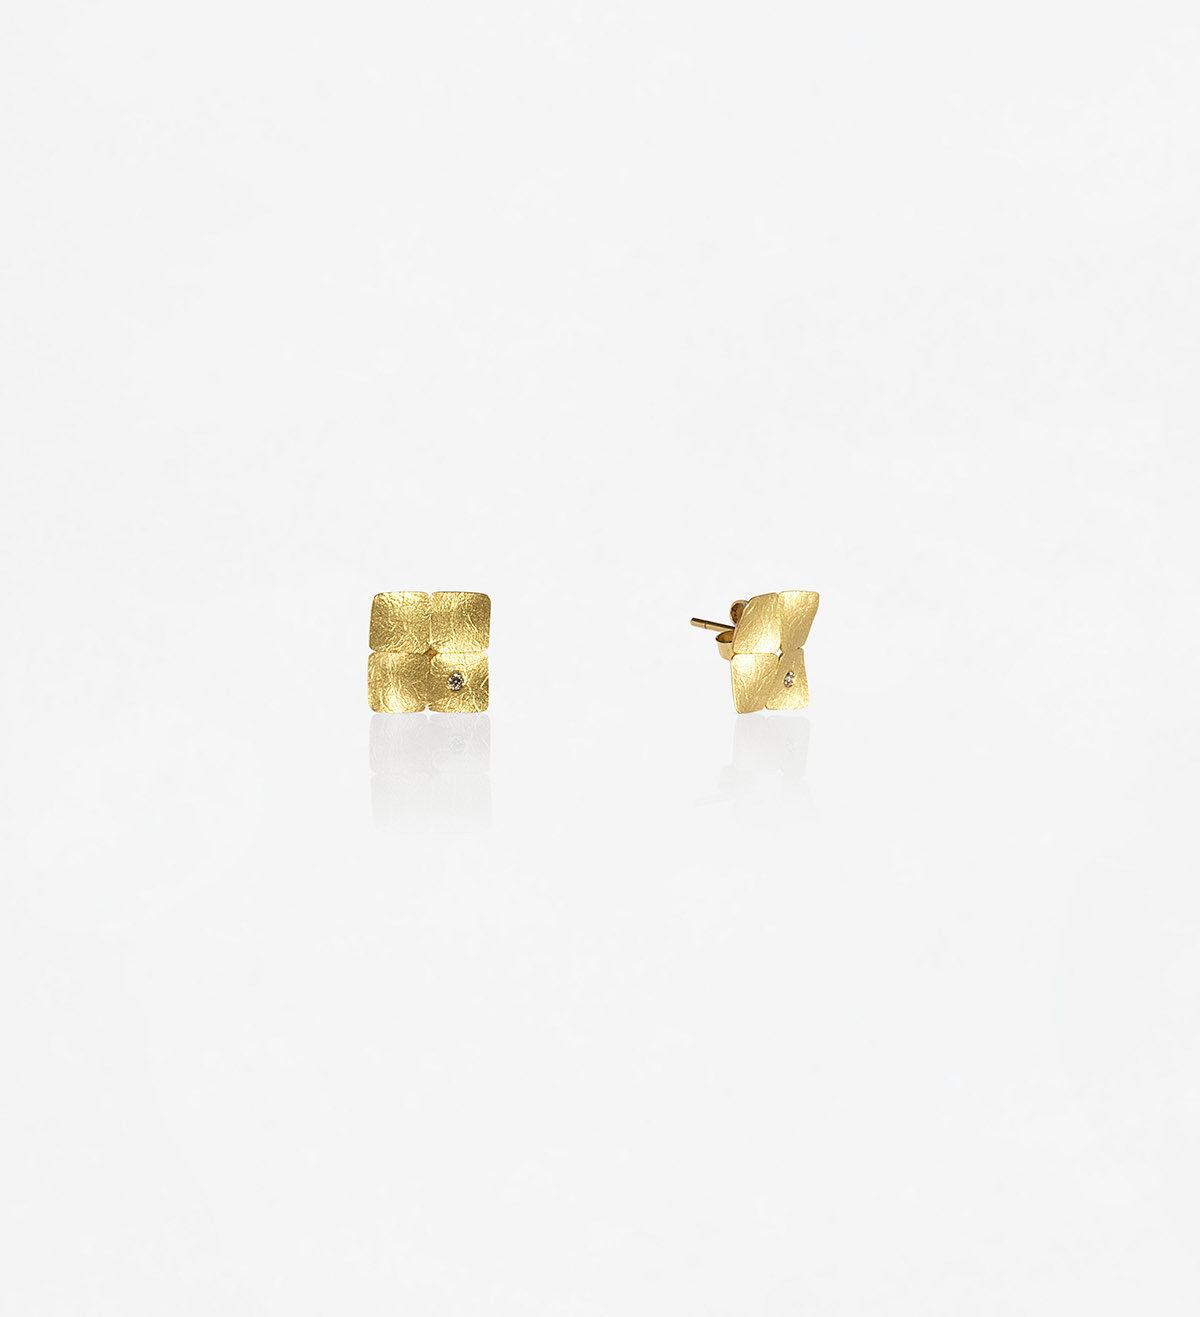 18k gold earrings Ones 14mm with diamonds 0.05ct